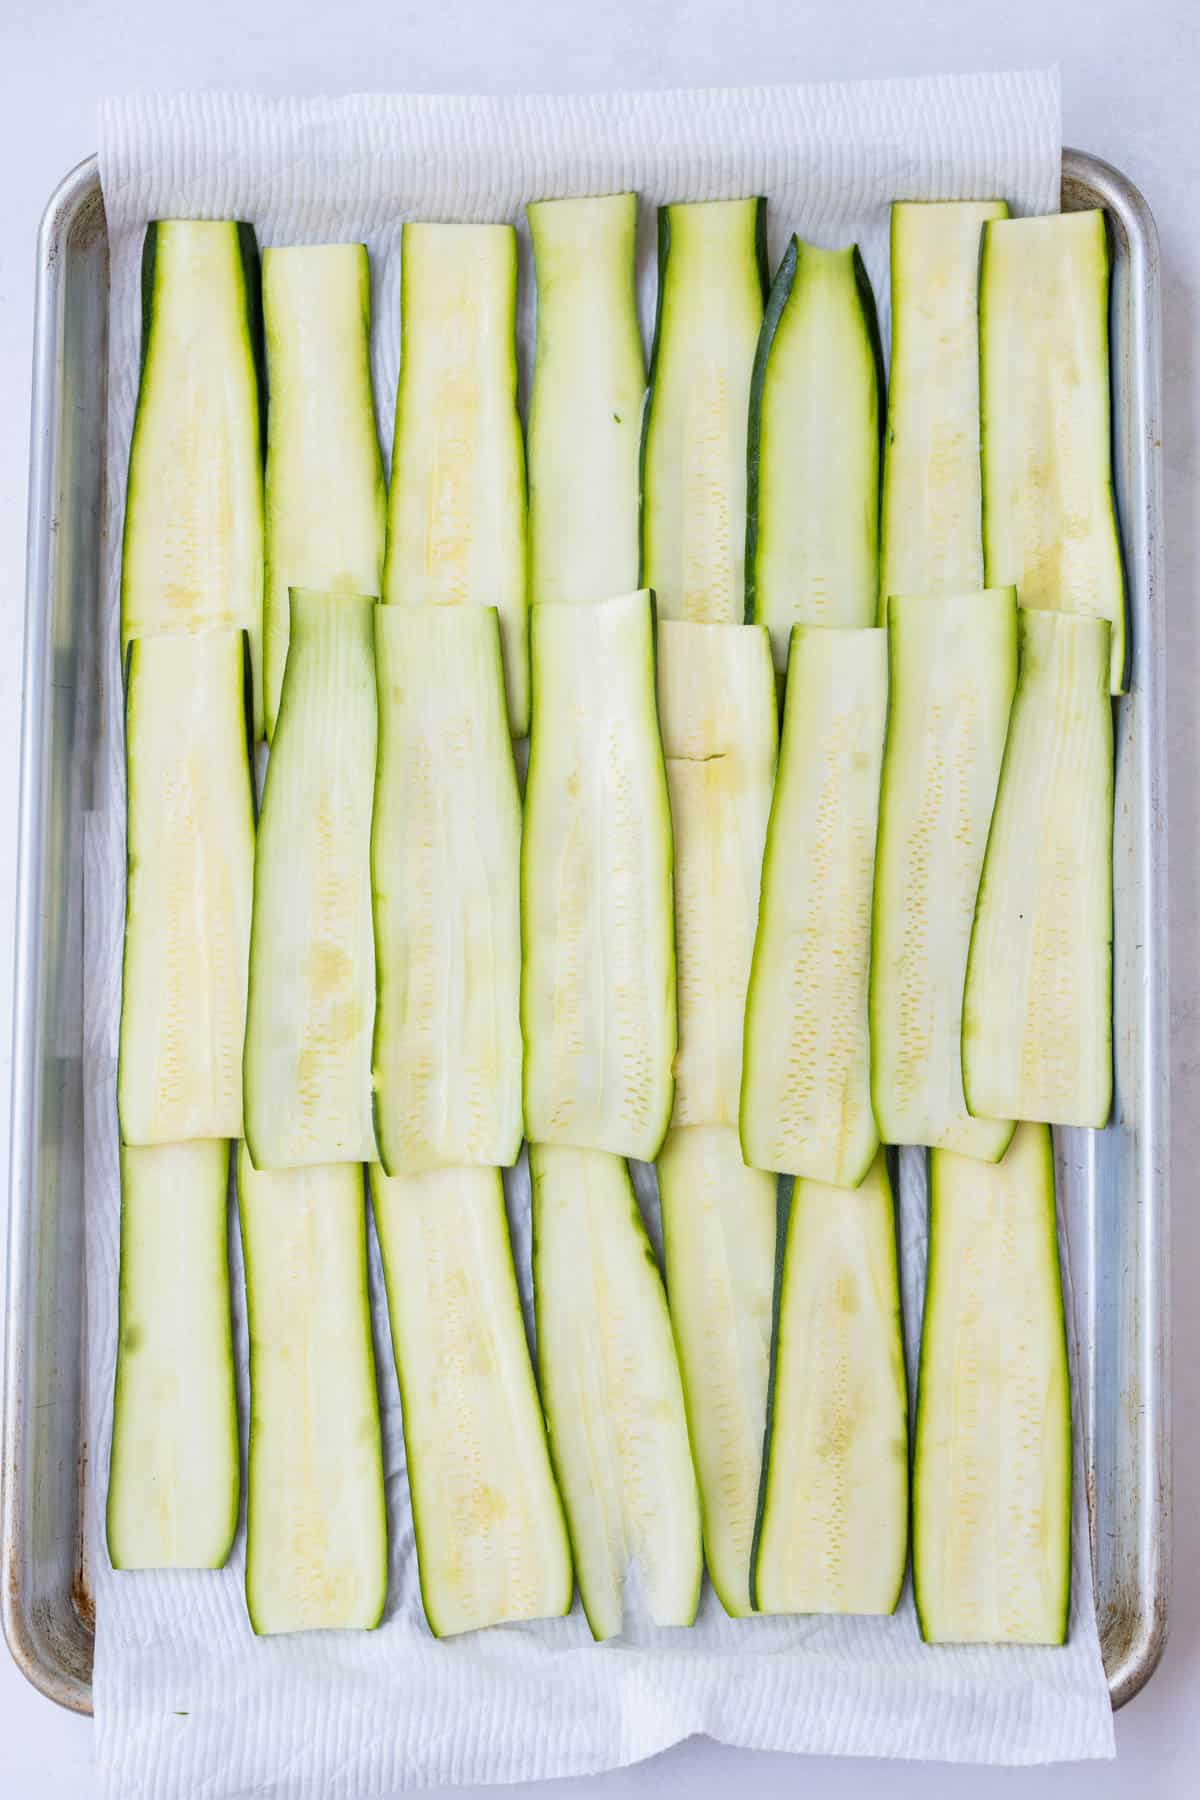 Zucchini strips are spread out and sprinkled with salt.